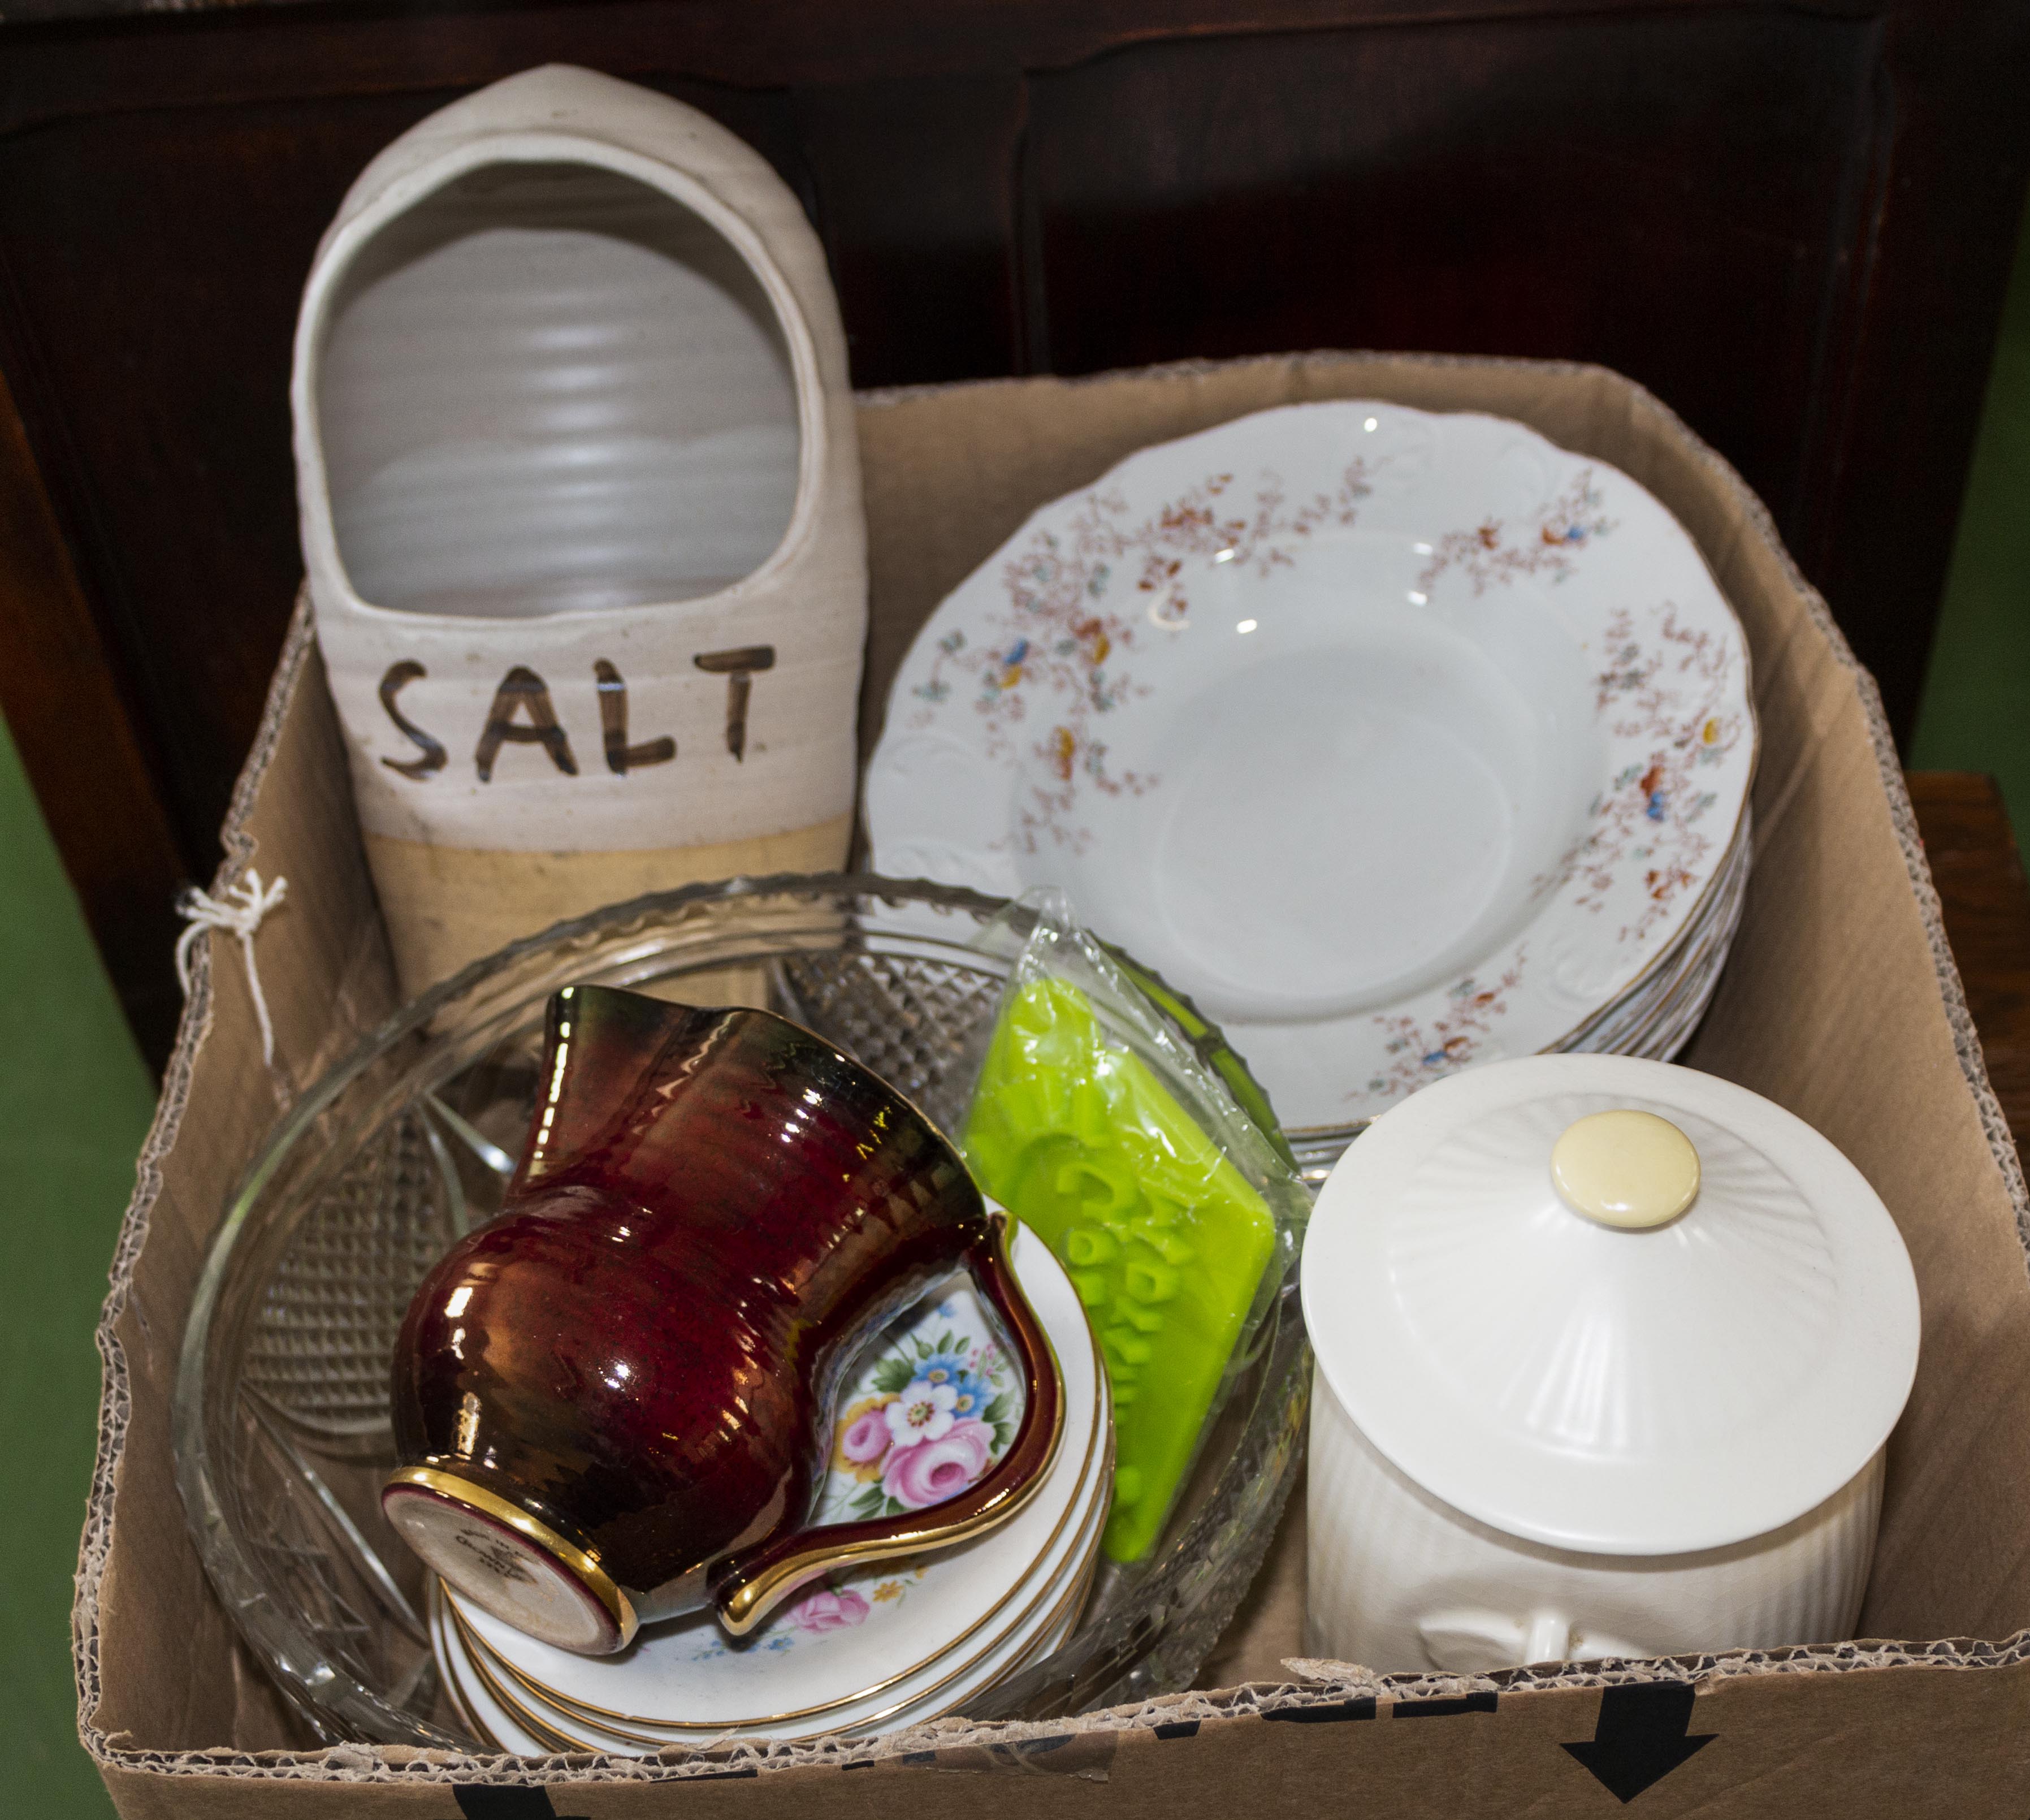 A box containing pottery and glass